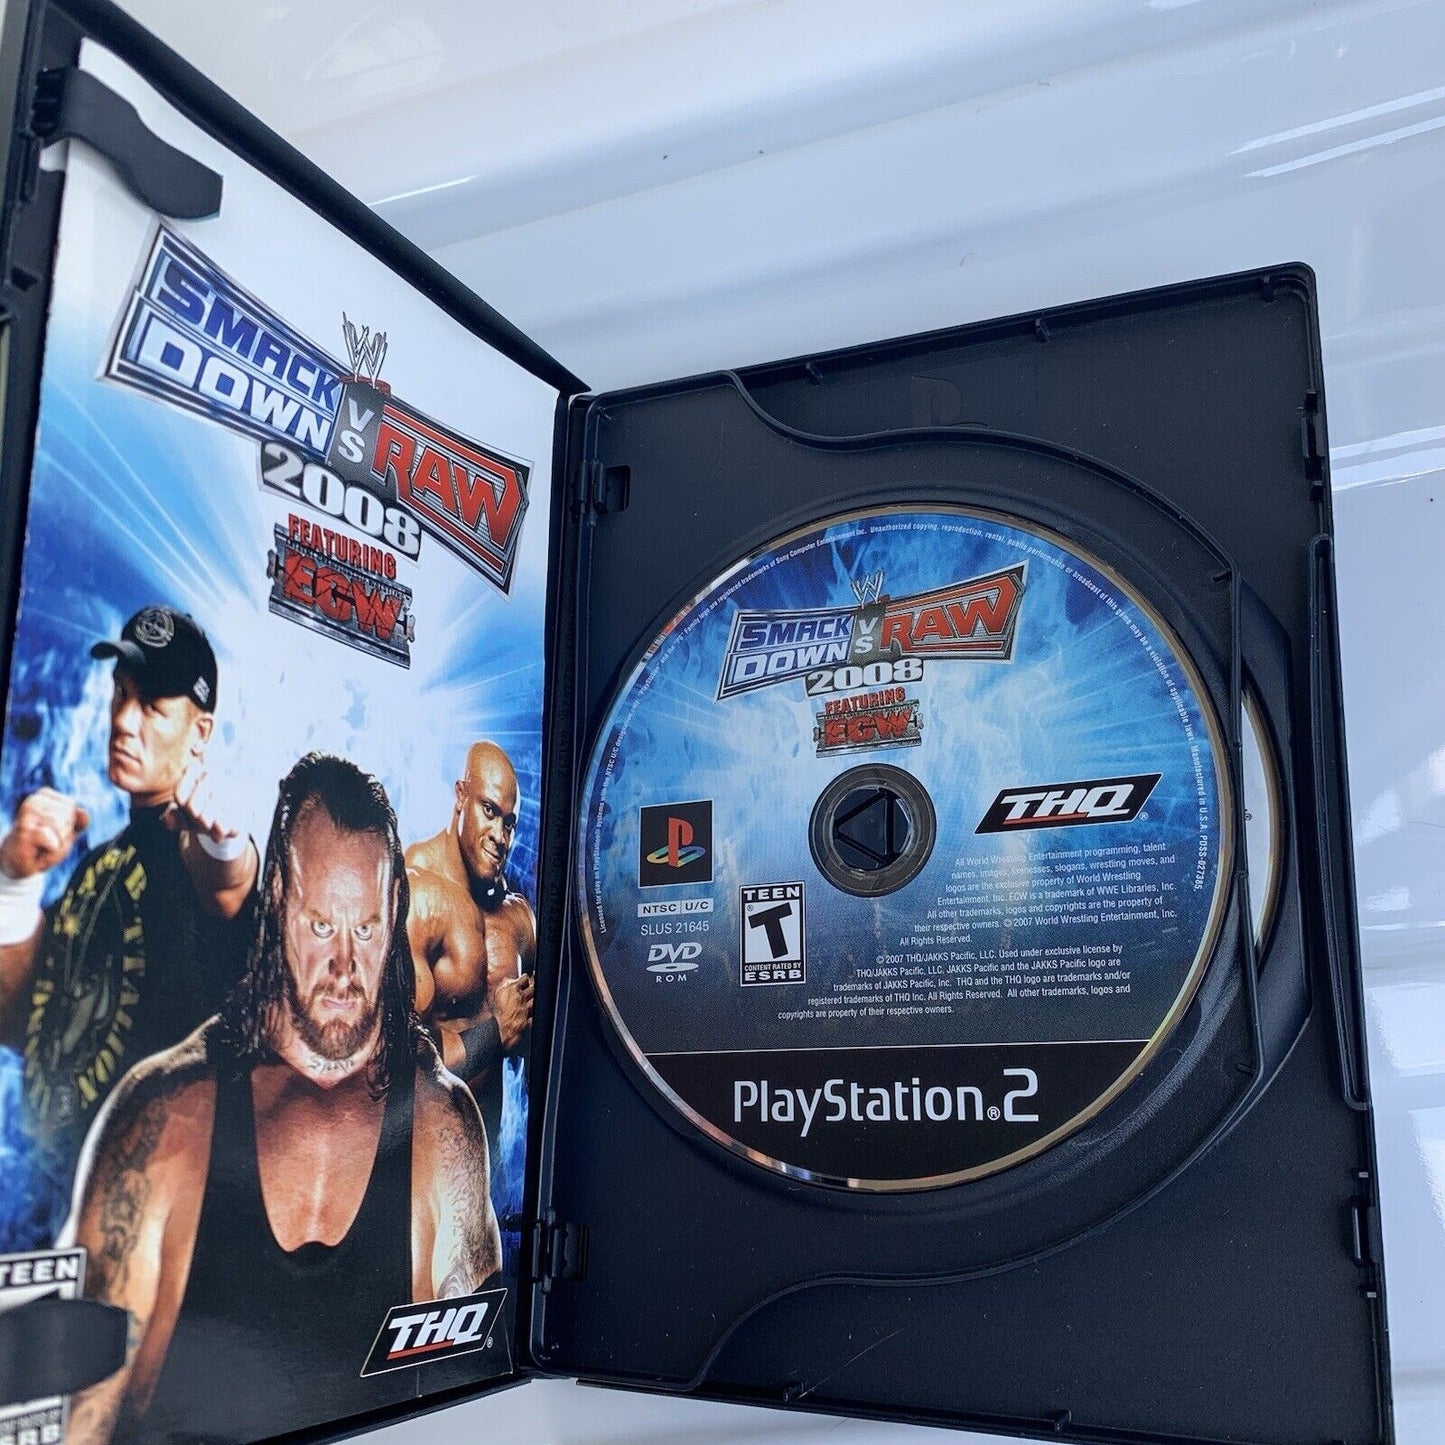 WWE SmackDown vs Raw 2008 PS2 Featuring ECW Complete Bonus Disc CIB Tested